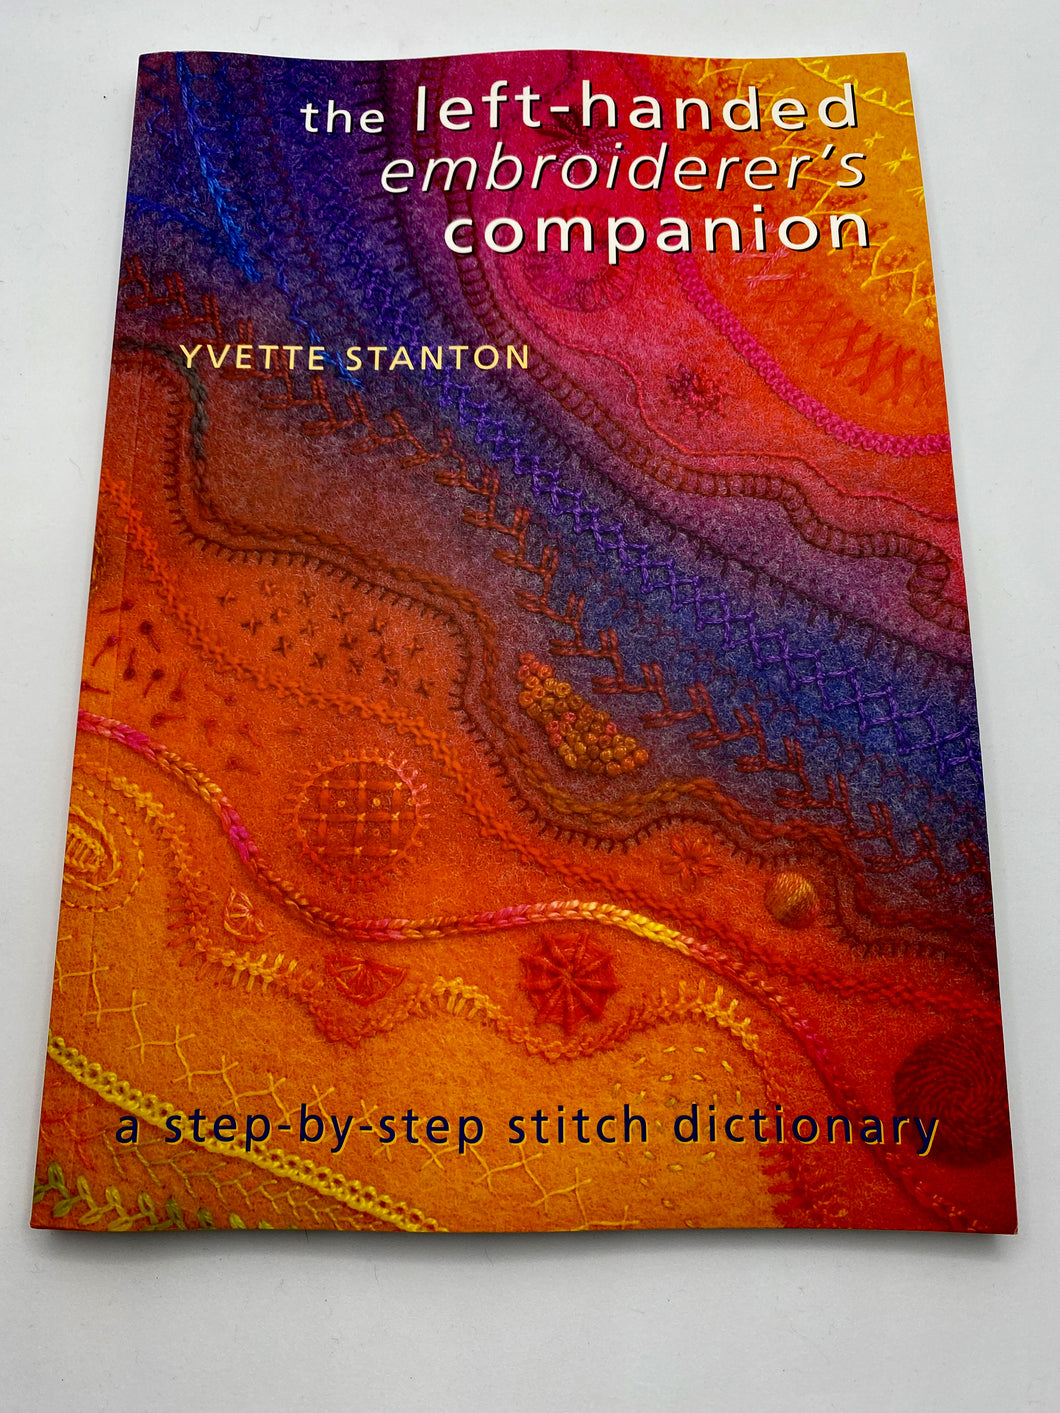 the left-handed embroiderer's companion by Yvette Stanton